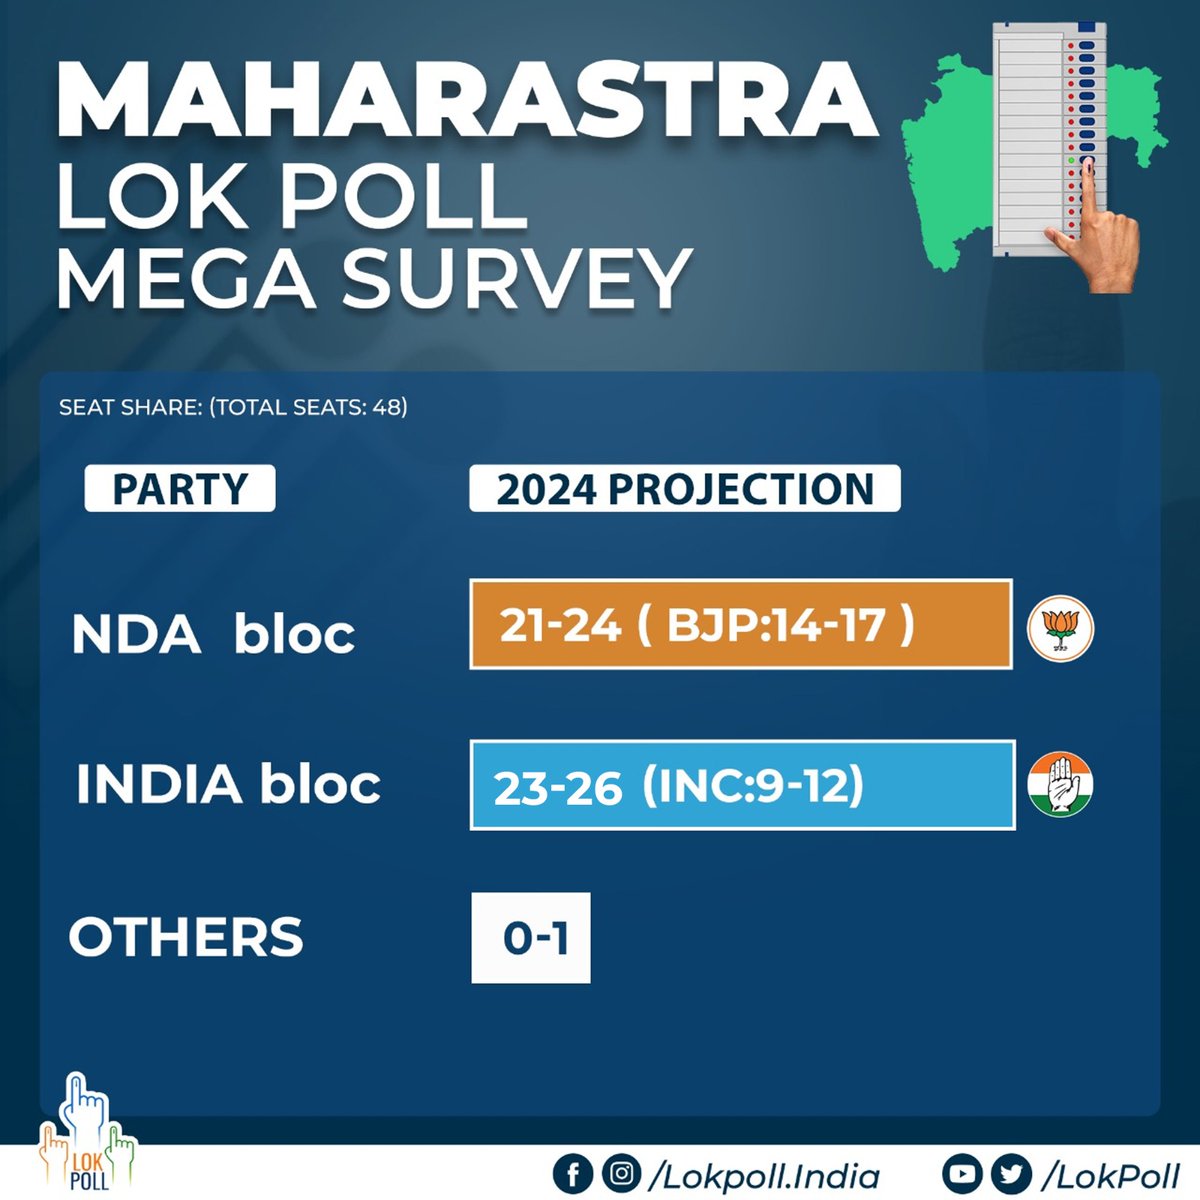 Presenting our final numbers for #Maharashtra, the largest state in the West: ▪️NDA Bloc 21 - 24 (BJP 14 - 17) ▪️INDIA Bloc 23 - 26 (INC 9 - 12) ▪️Others 0 - 1 Sample size: 1,350 per Parliamentary constituency. #LoksabhaElections2024 #Elections2024…